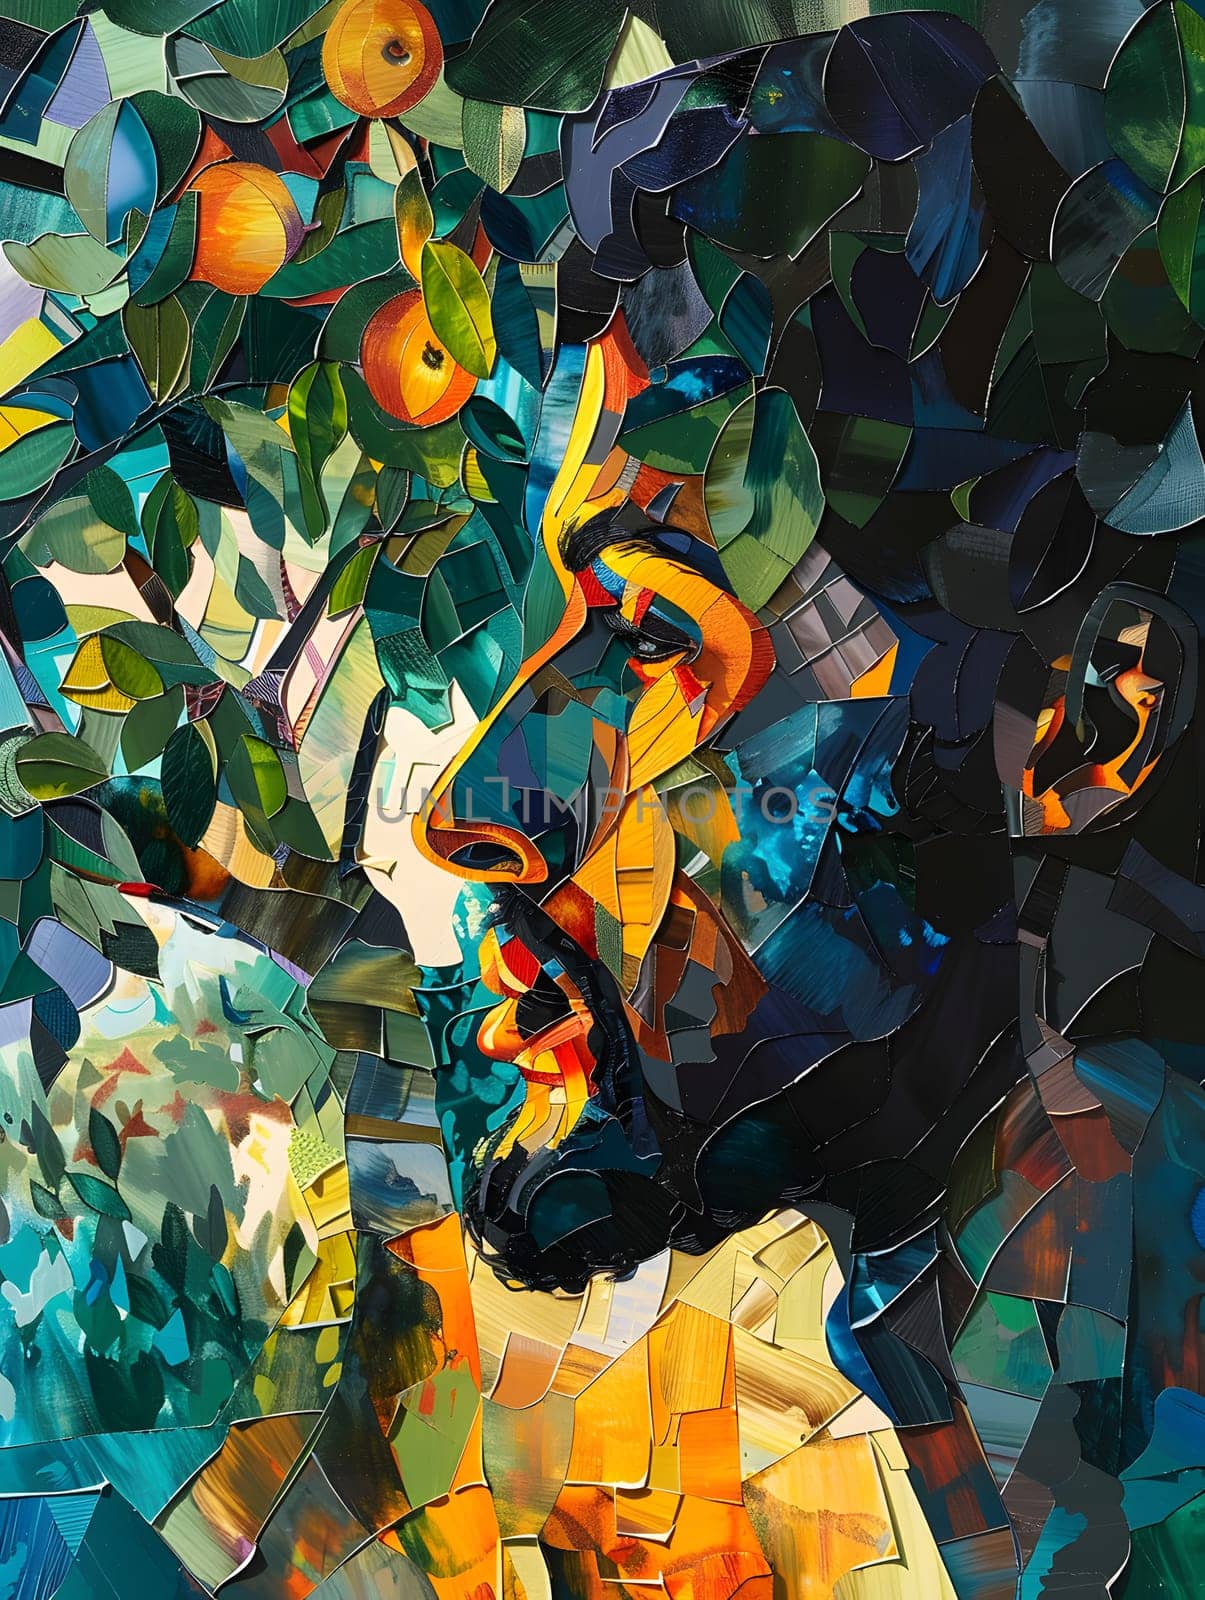 A painting depicting an organism standing under an apple tree, with electric blue skies and intricate patterns on the leaves. Artistic representation in visual arts